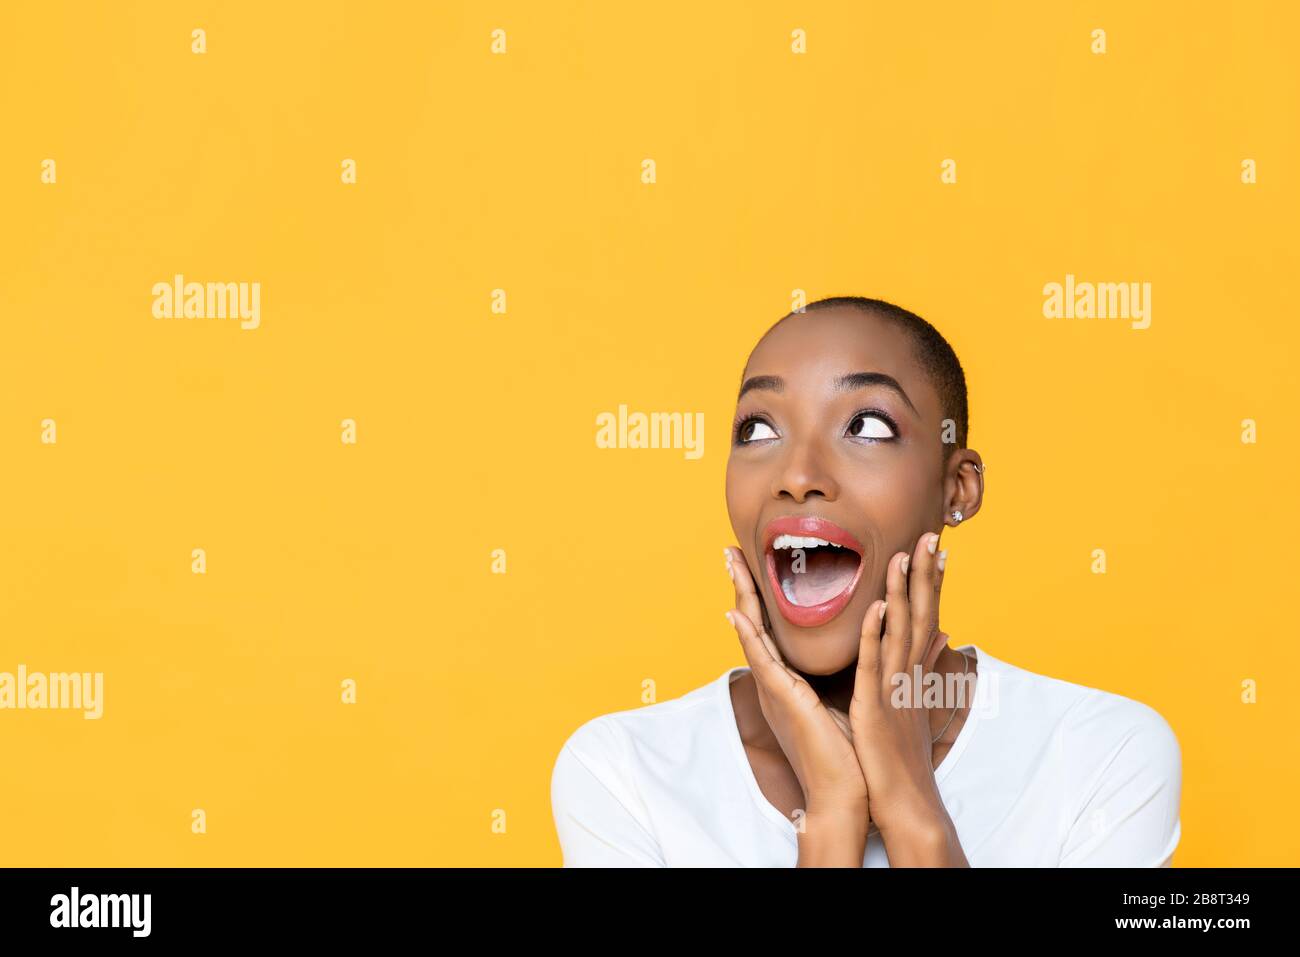 Shocked African American woman with hands on cheeks gasping and looking up to copy space aside isolated on yellow background Stock Photo